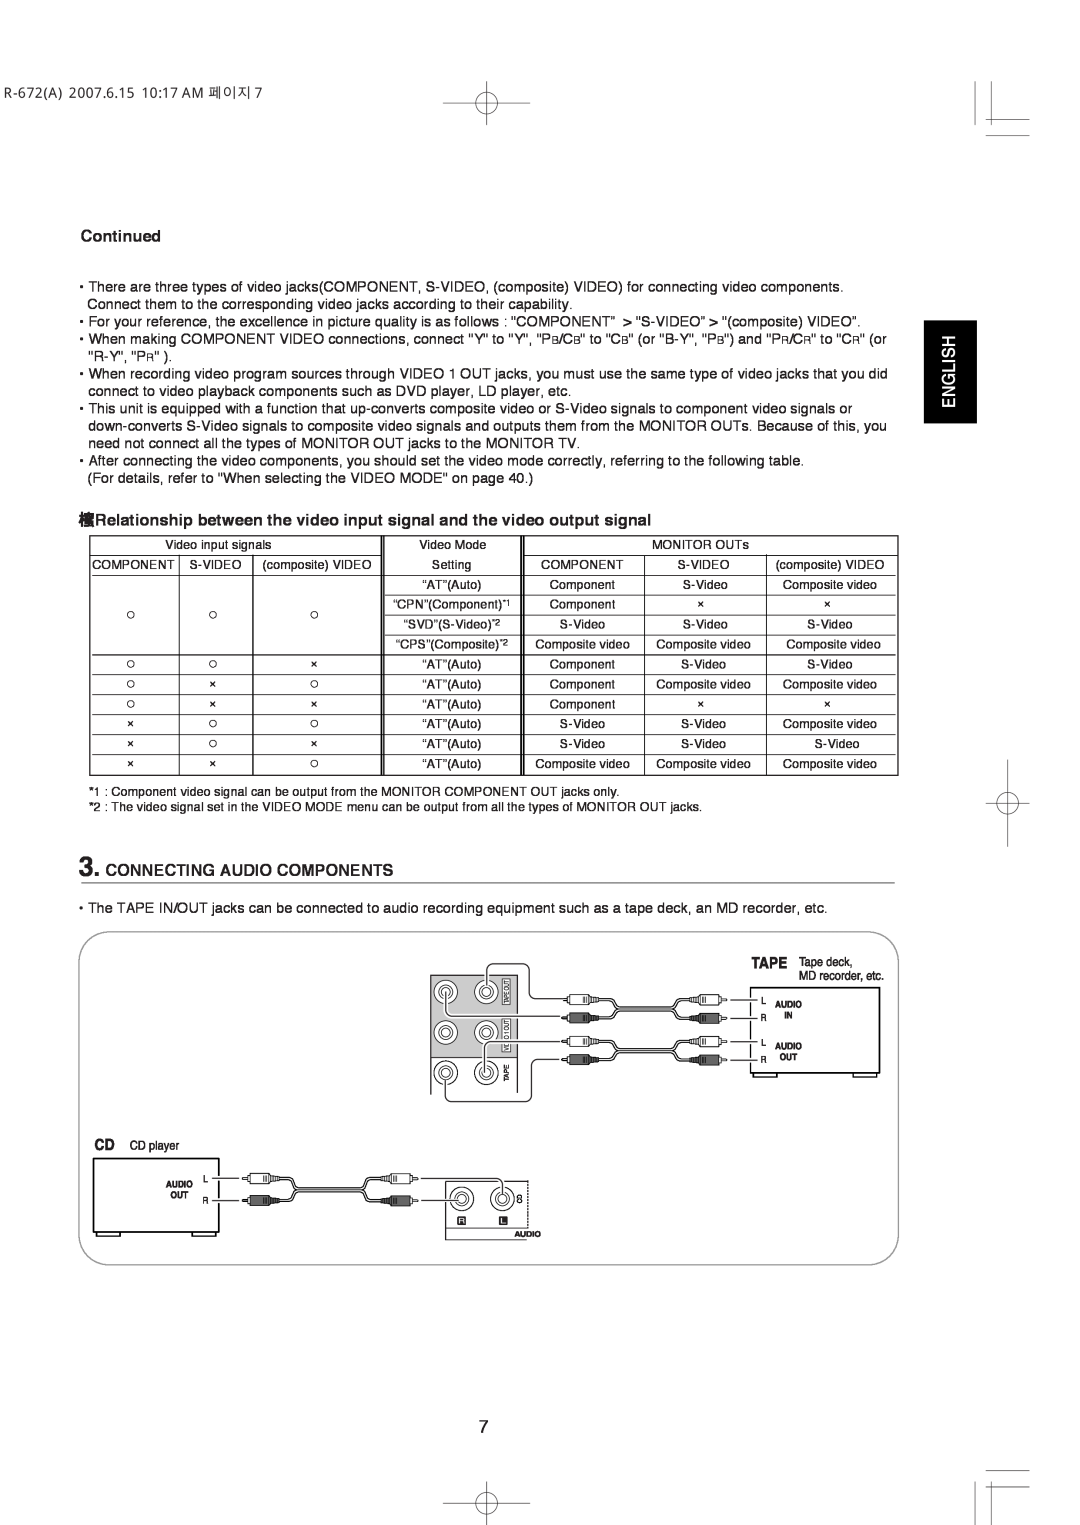 XM Satellite Radio manual Continued, Connecting Audio Components, English, R-672A2007.6.15 10 17 AM 페이지 